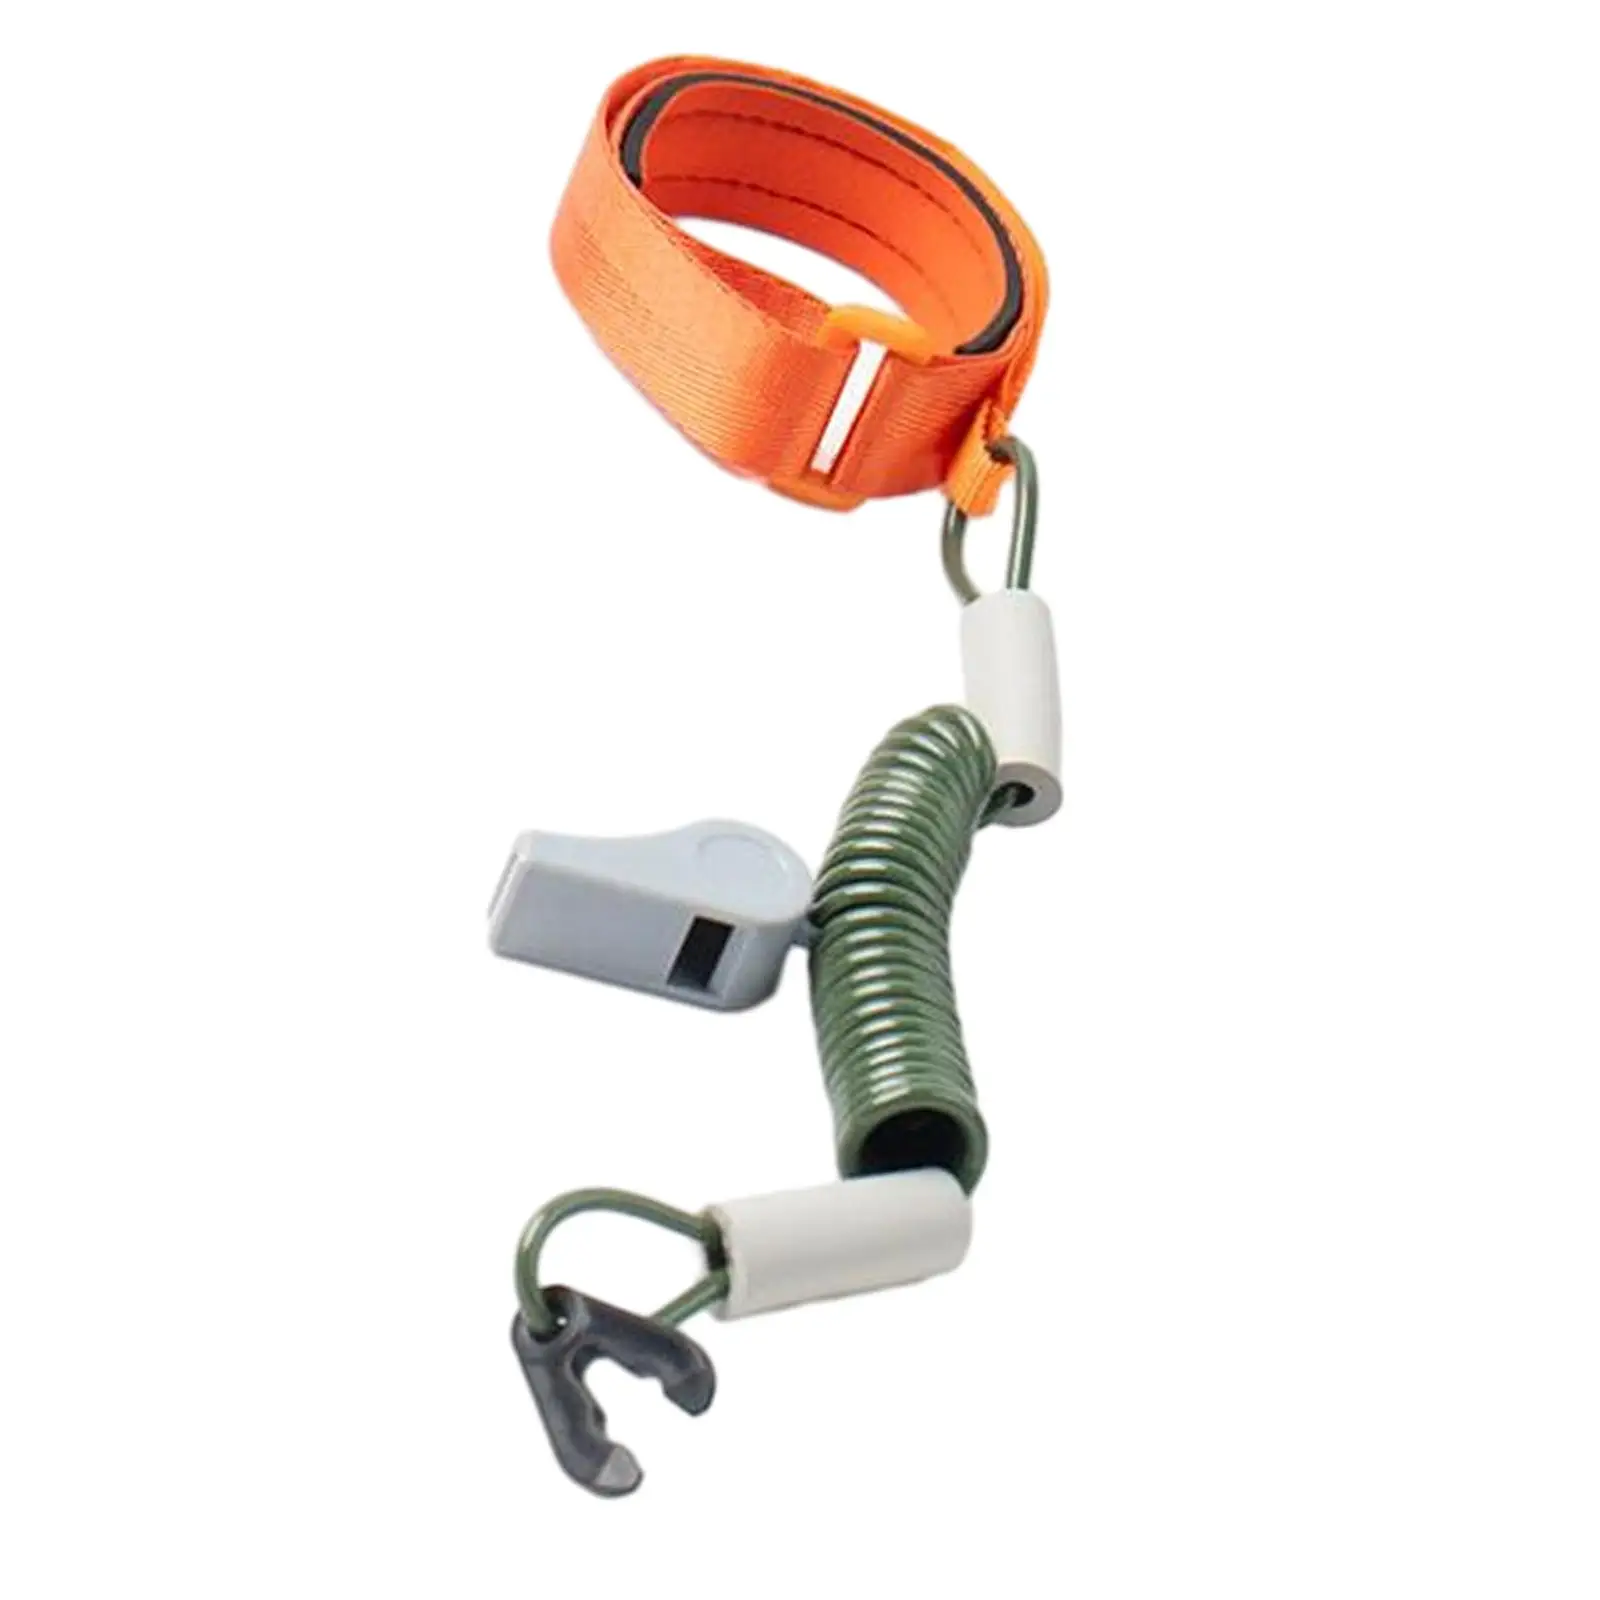 Boat Engine Stop Switch Key Lanyard with Whistle Accessories Multifunctional